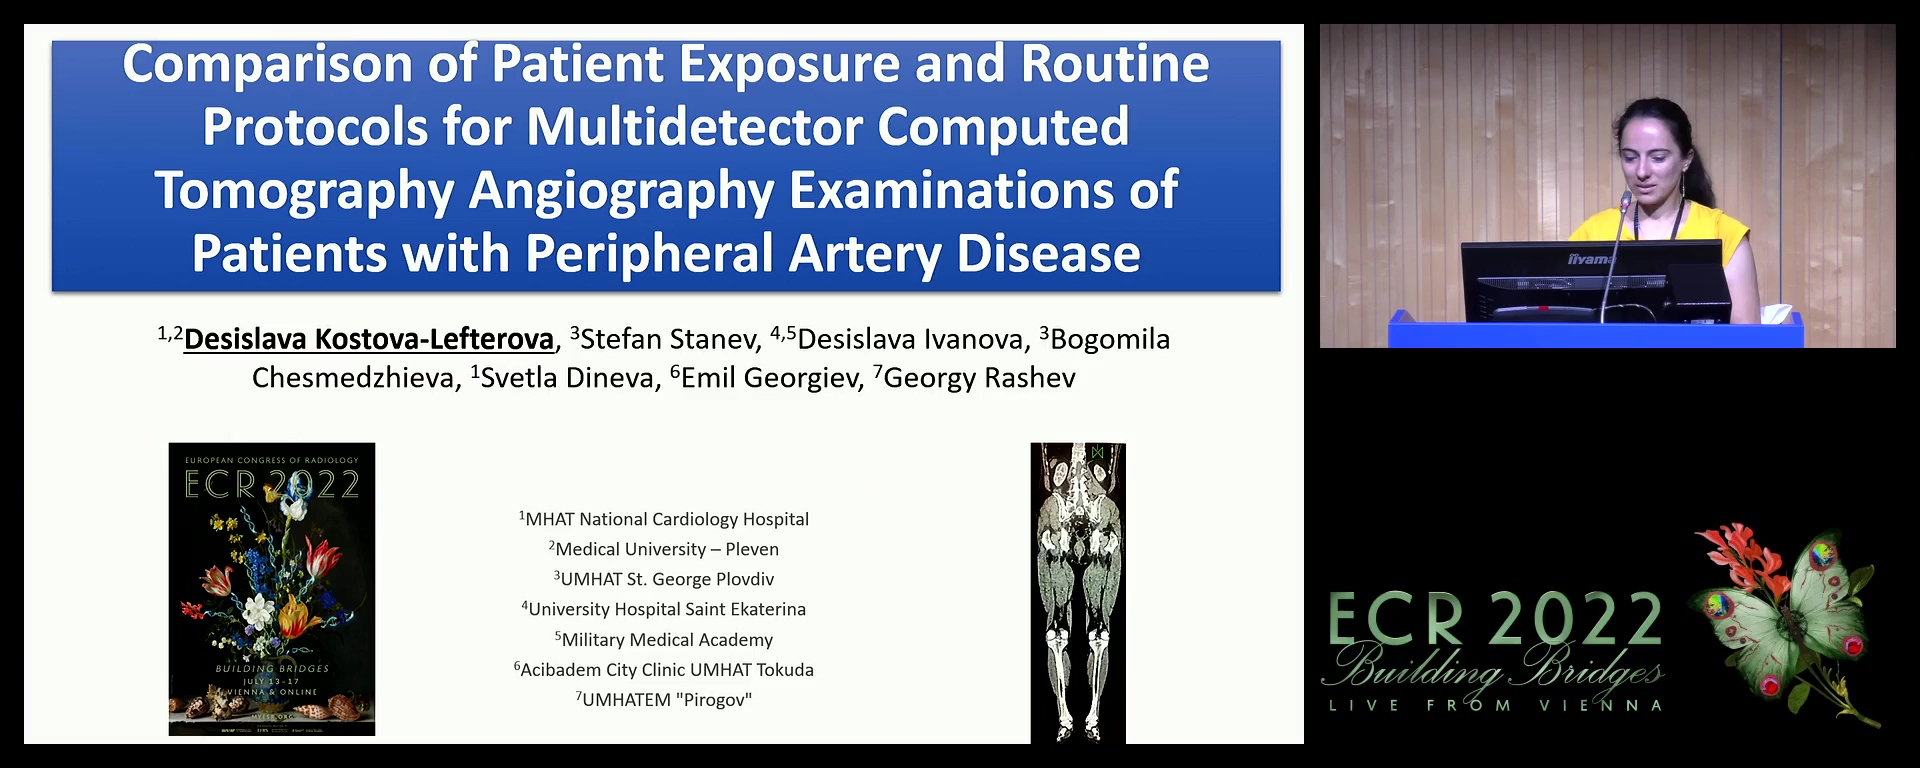 Comparison of patient exposure and routine protocols for multidetector computed tomography angiography examinations of patients with peripheral artery disease - Desislava Kostova-Lefterova, Sofia / BG